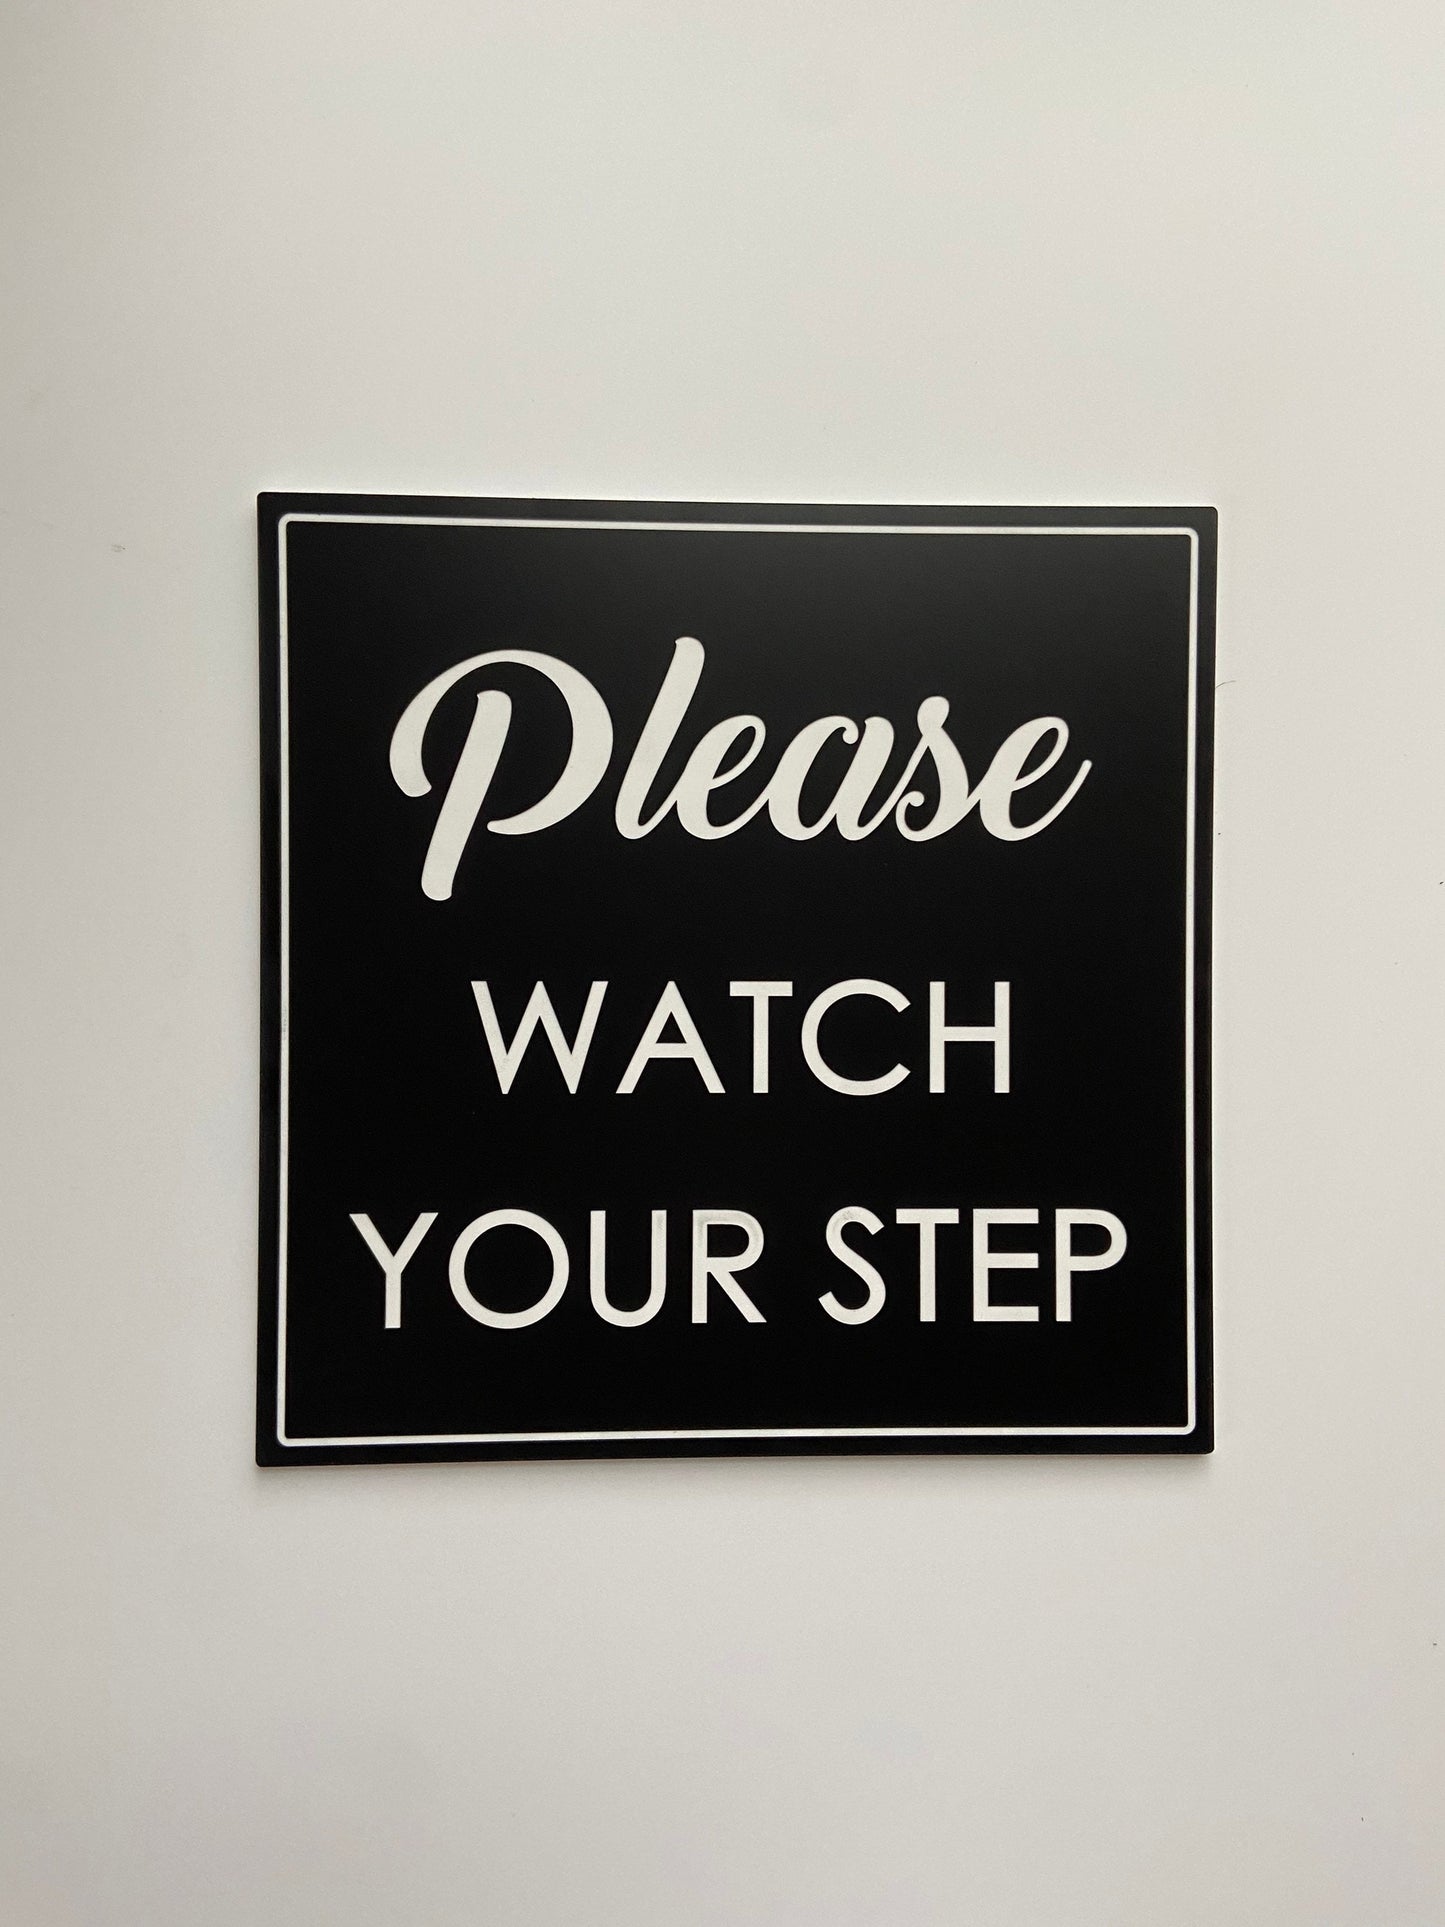 Please Watch Your Step BUSINESS Custom Sign | 7.5x7.5” Easy to install | COFFEE SHOP Restaurant | Cafe Decor Display